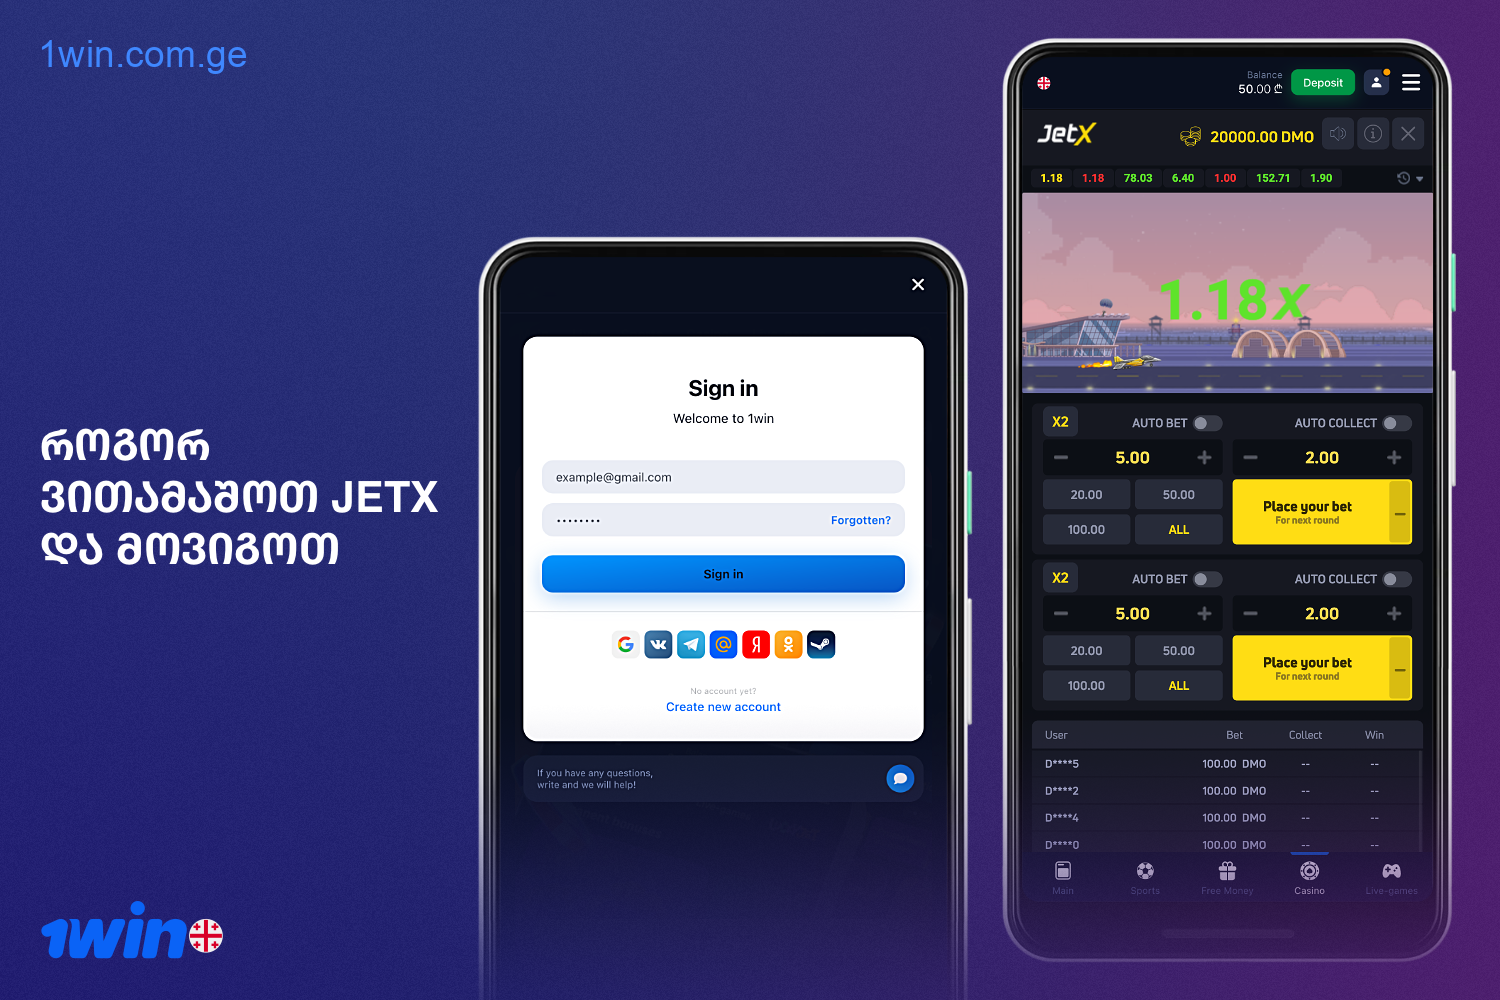 To start playing JetX on the 1win website or app, you need to follow a few simple steps